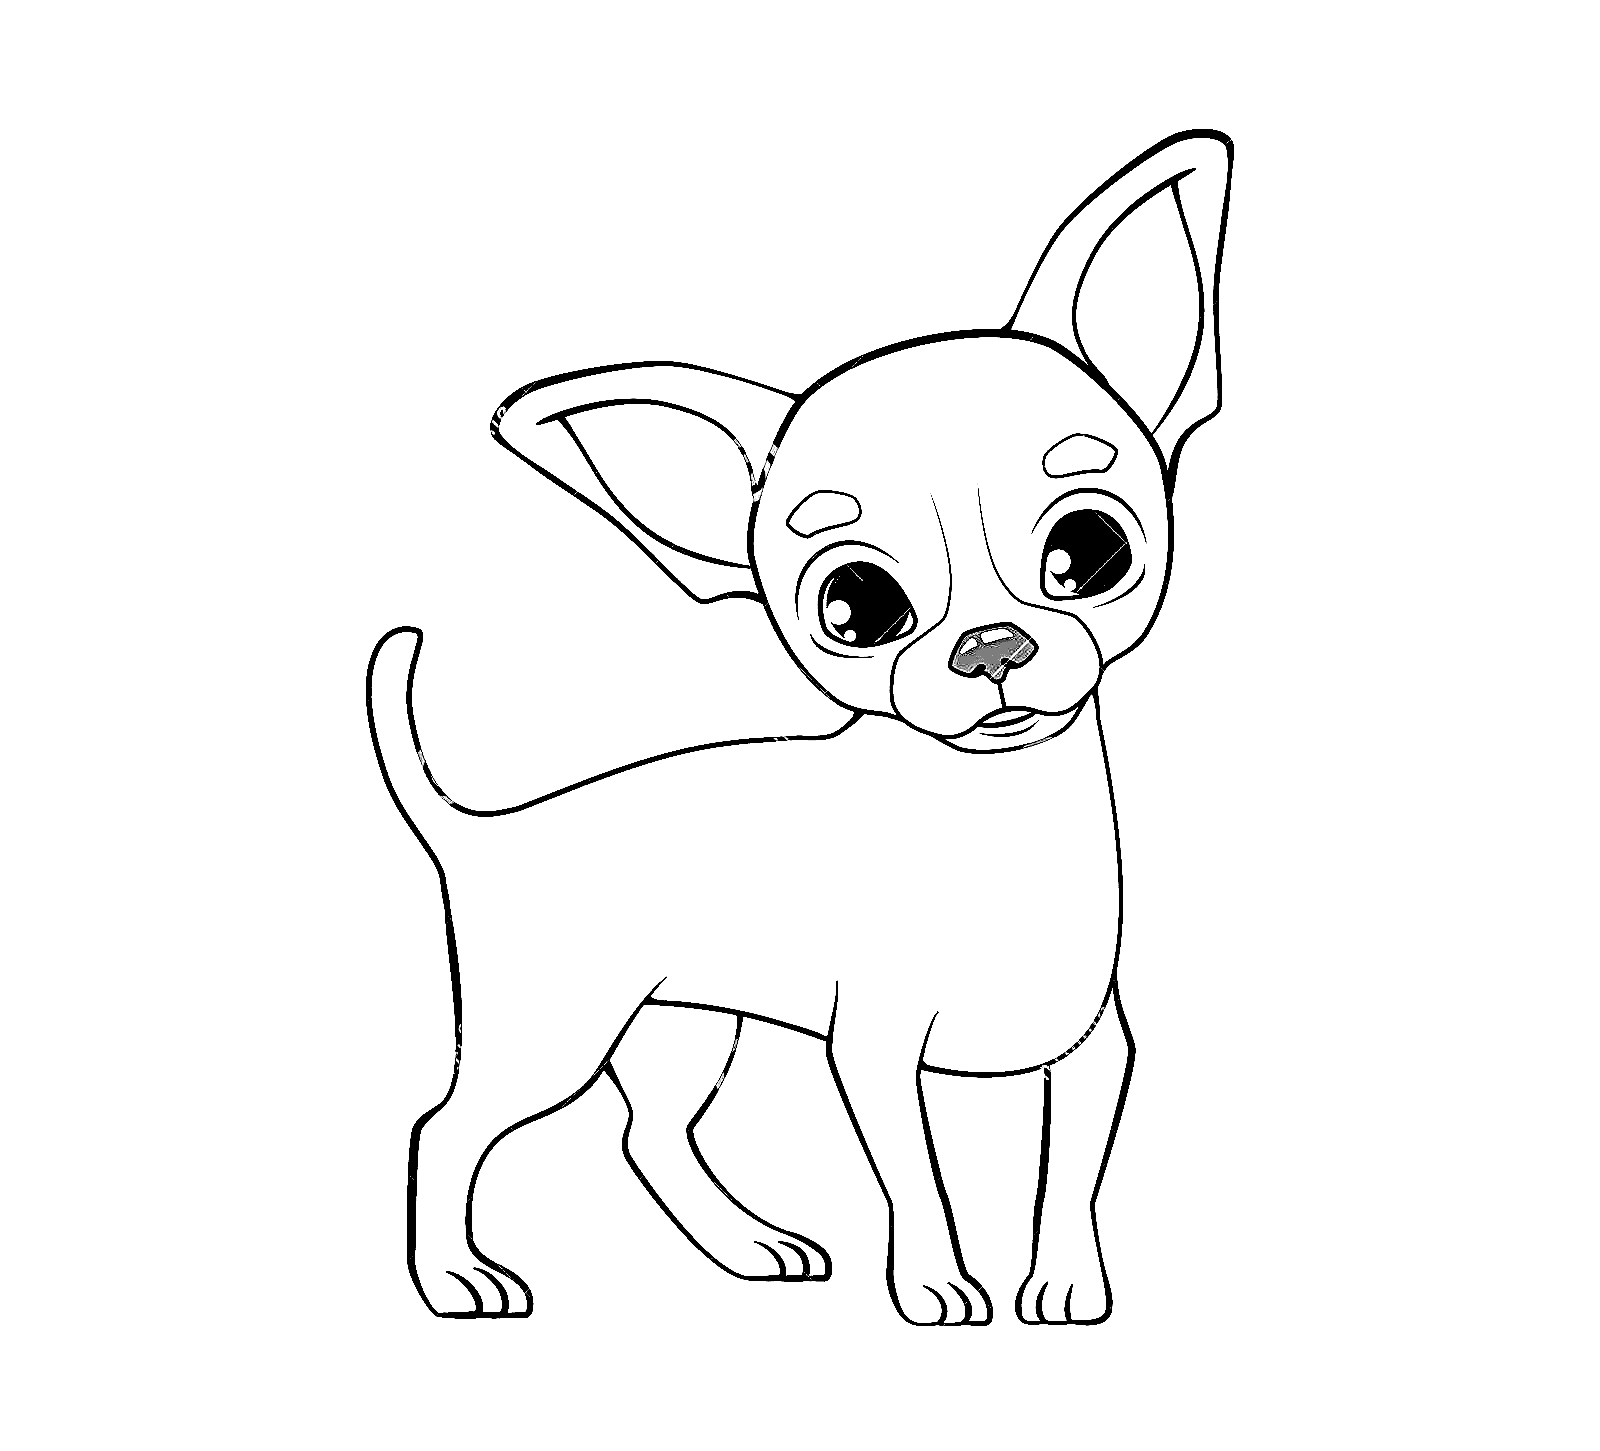 Chihuahua in Sombrero Coloring Pages - Coloring Cool